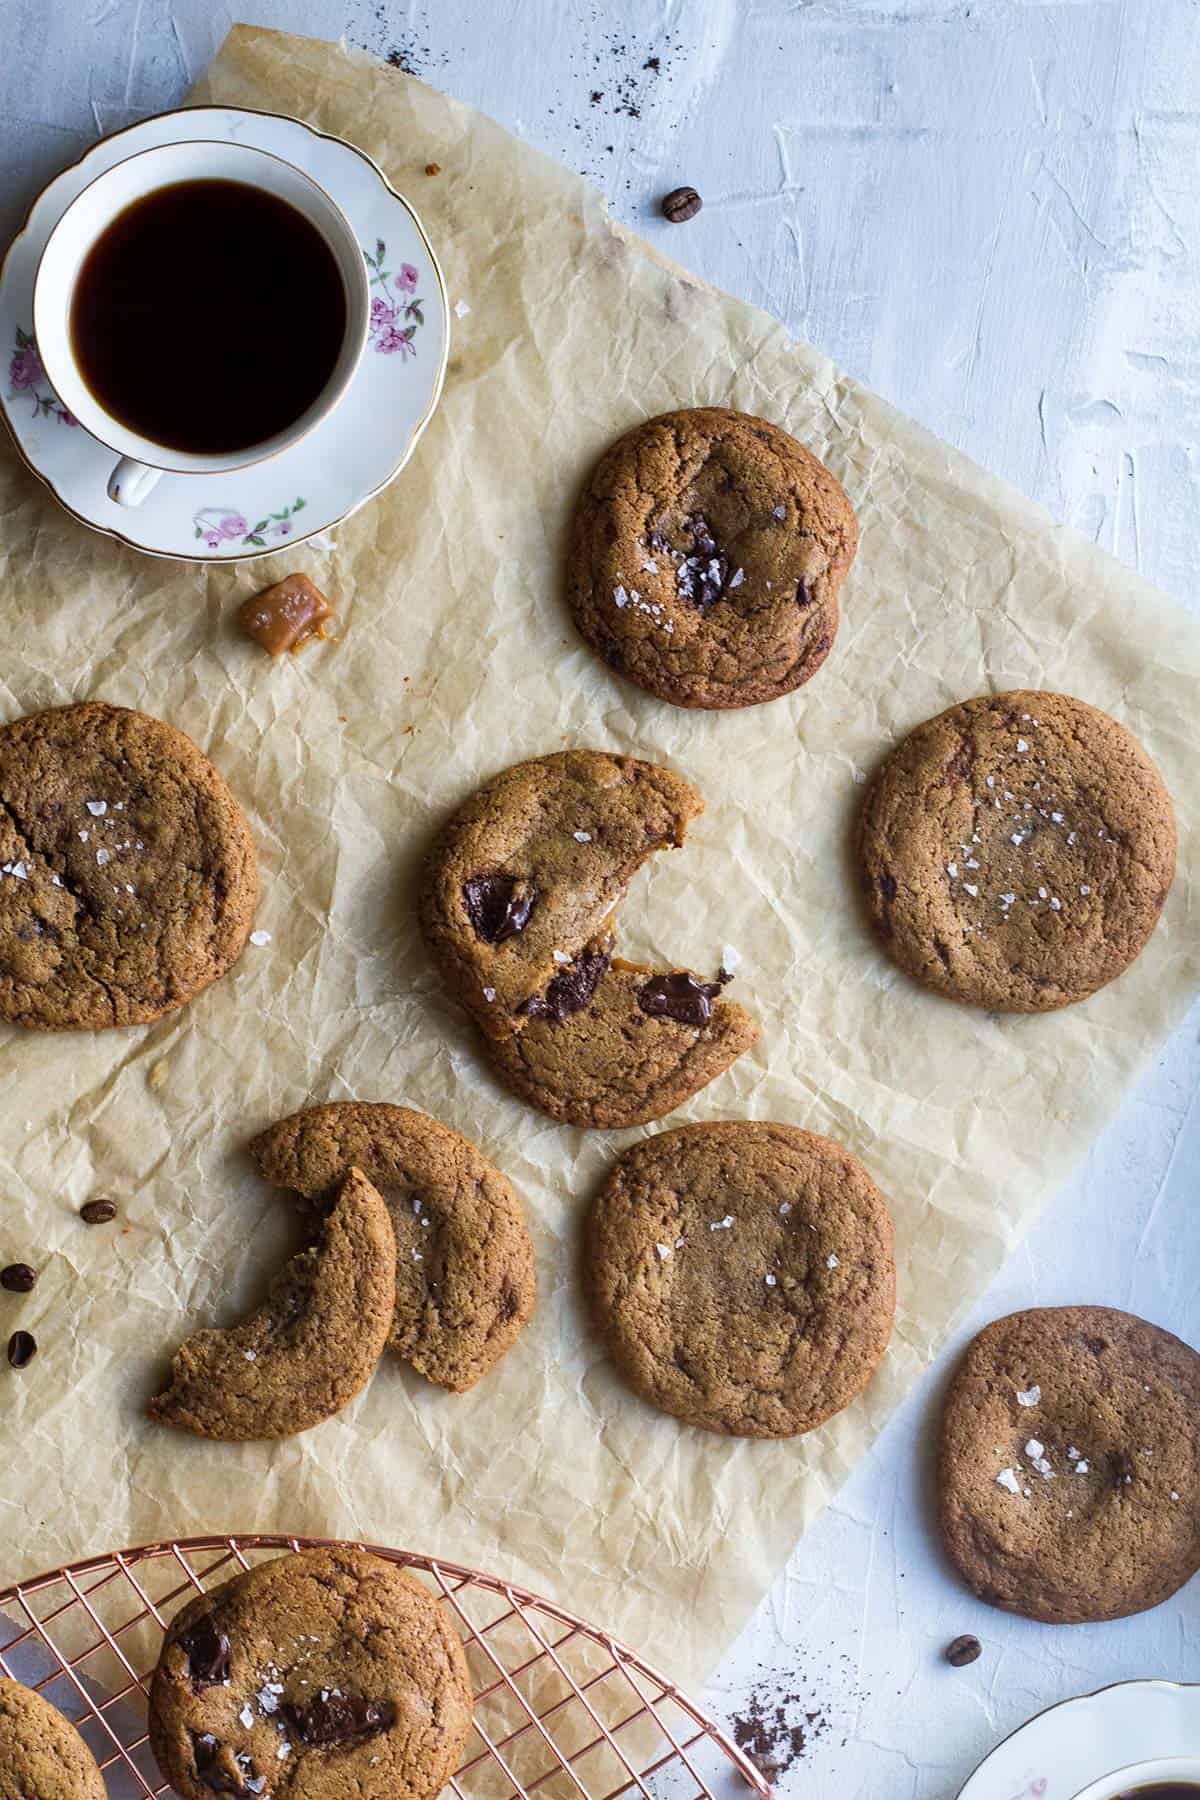 Coffee cookies on a parchment paper, some broken to show the caramel inside.